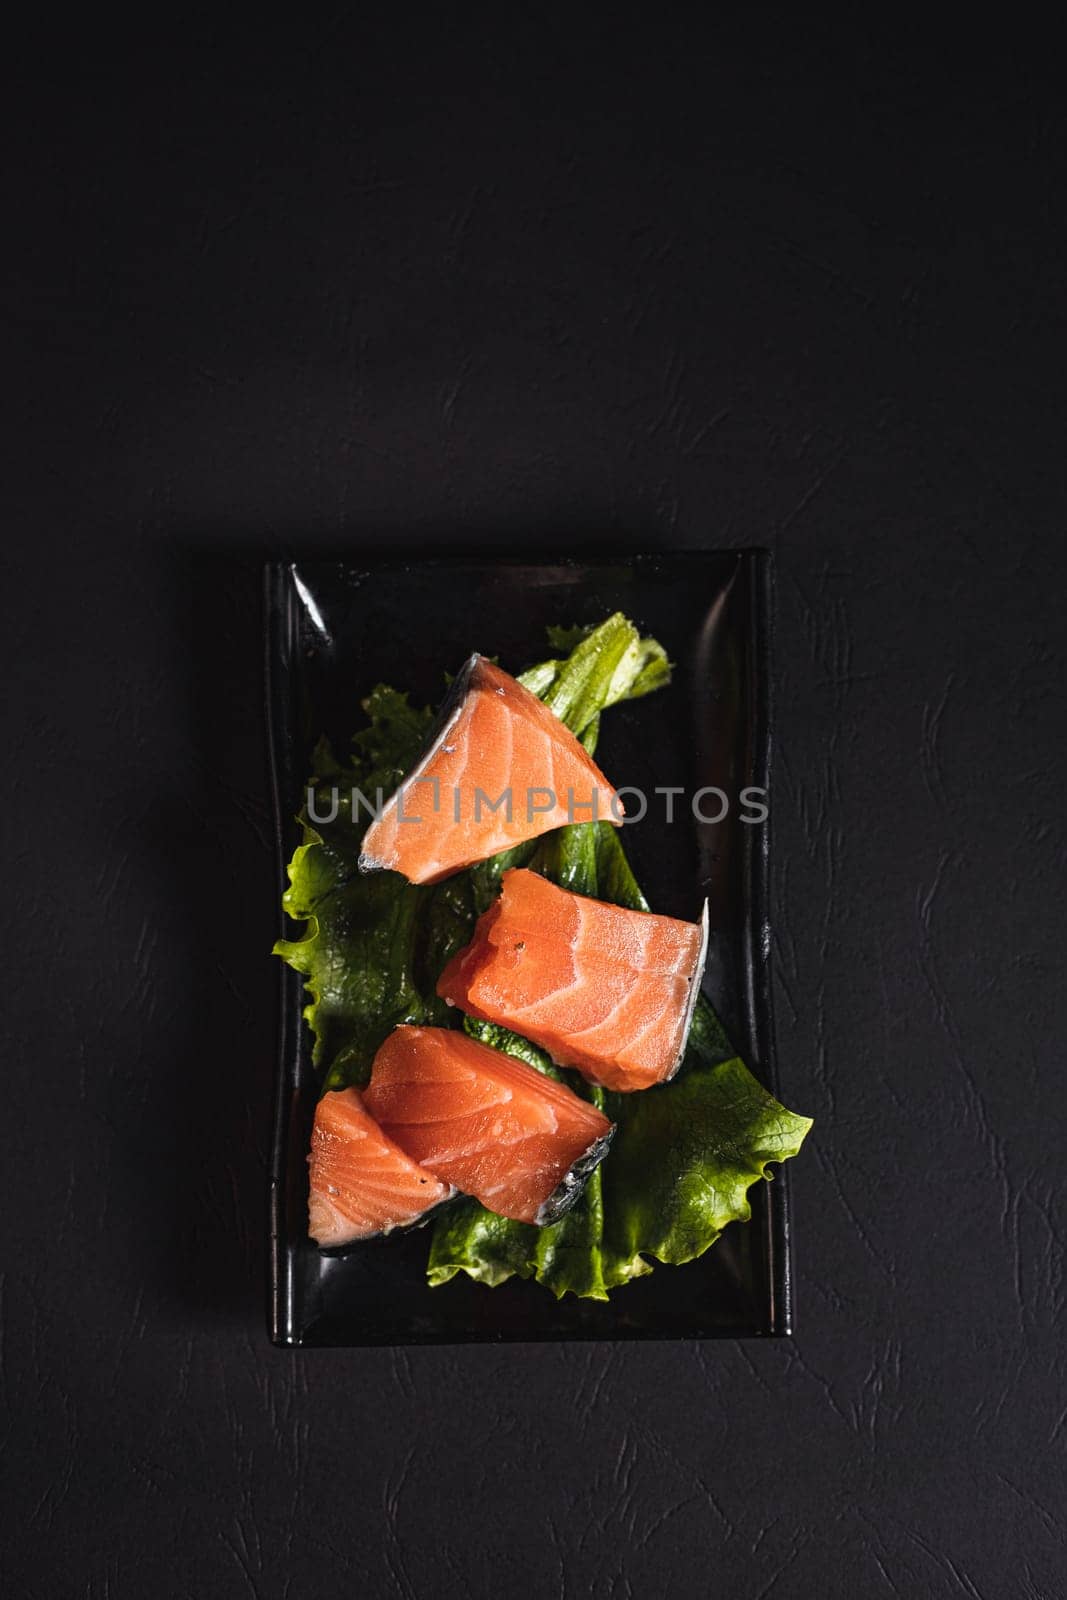 red fish on lettuce leaves on a black plate top view by tewolf